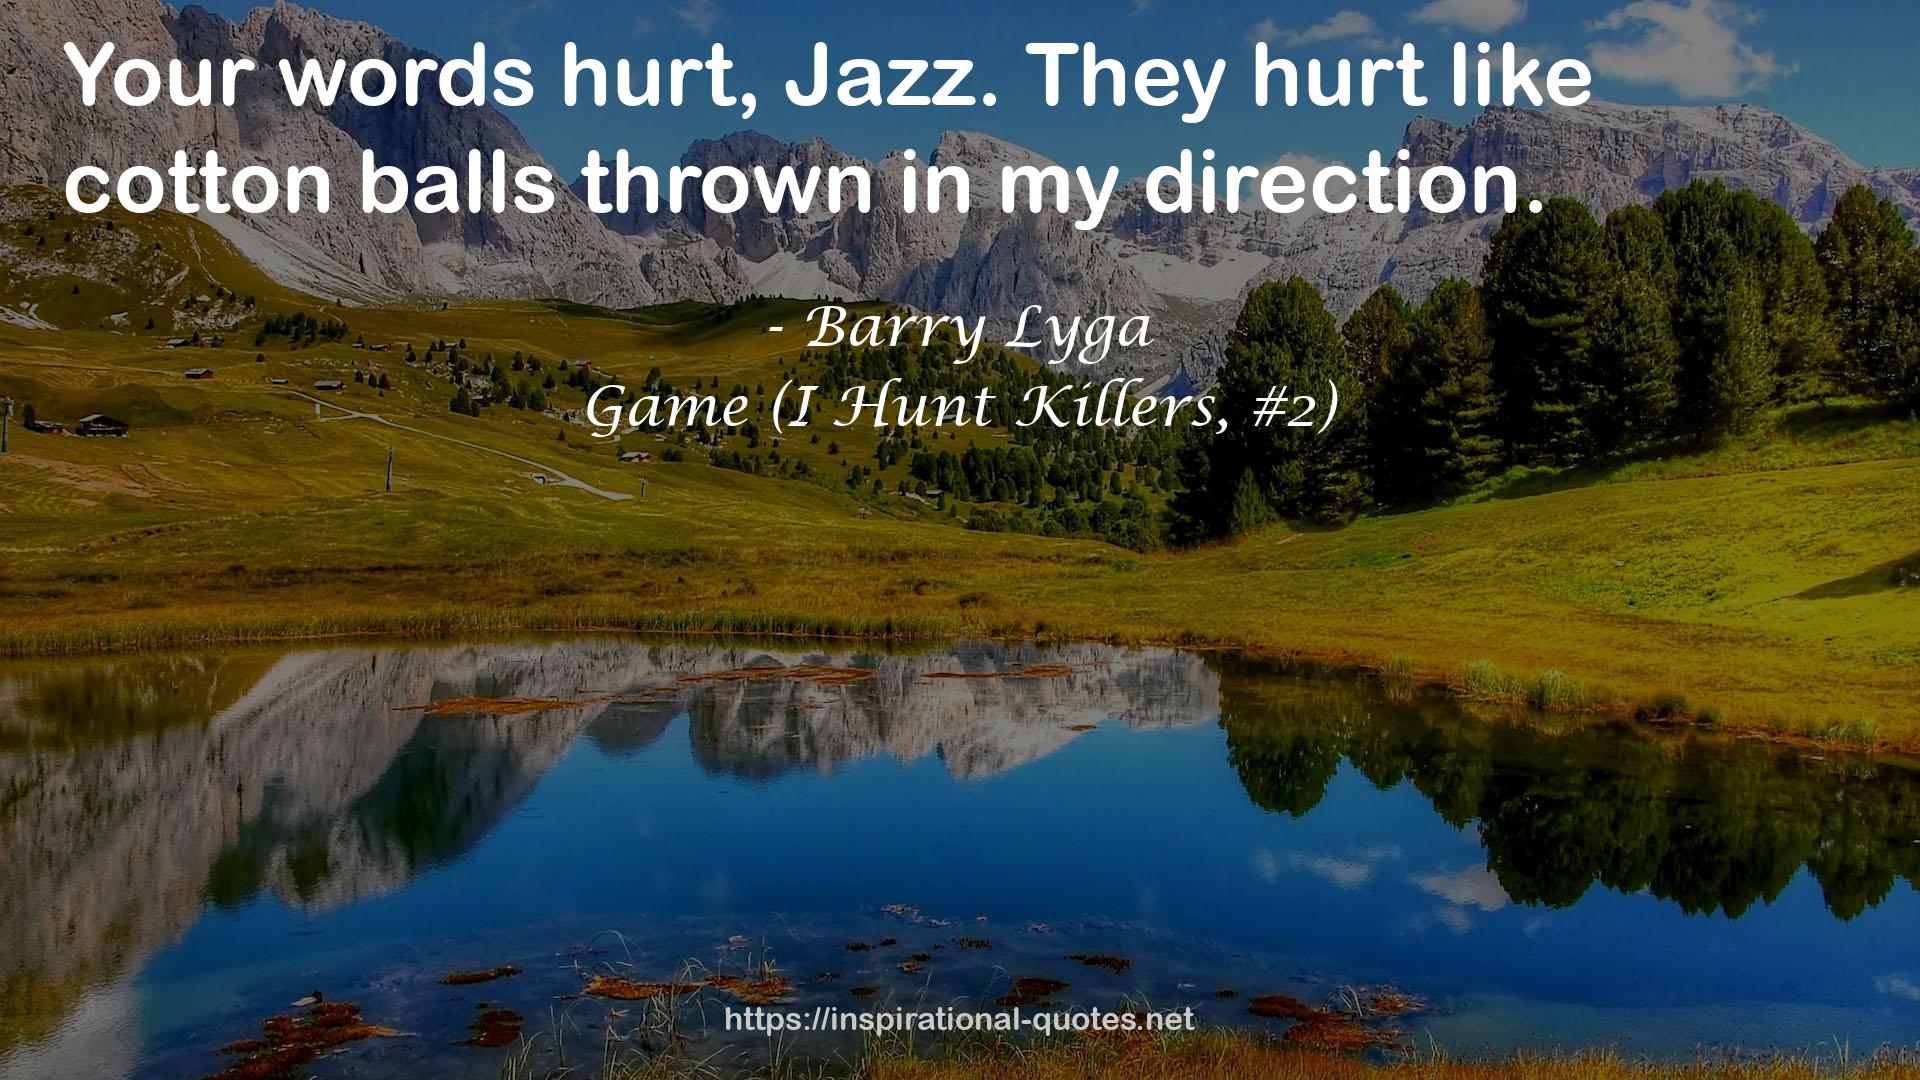 Game (I Hunt Killers, #2) QUOTES